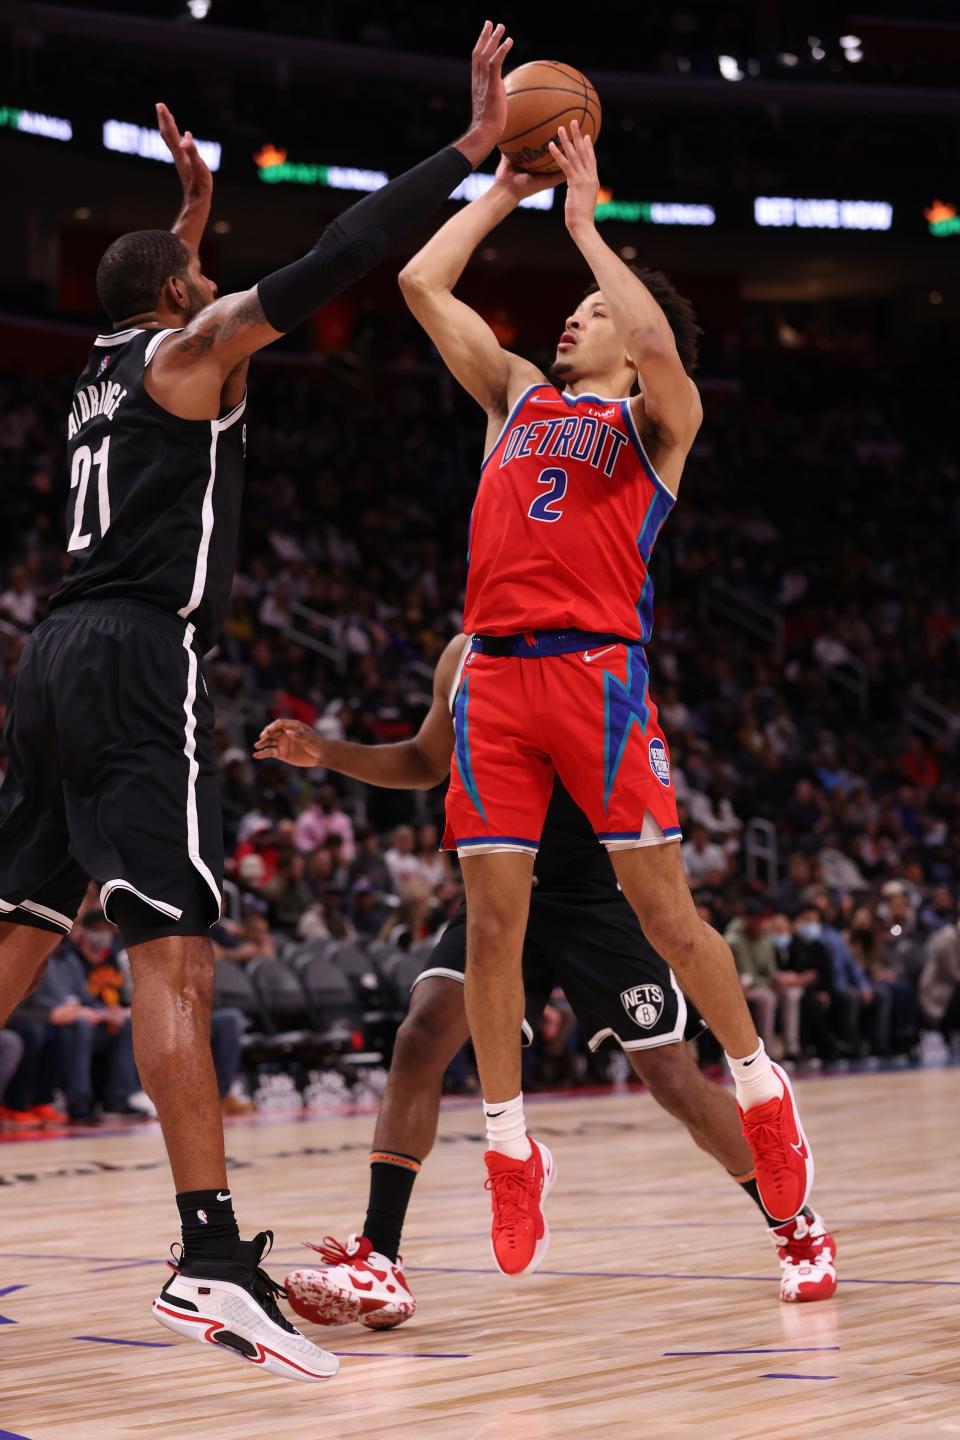 Cade Cunningham of the Detroit Pistons takes a first half shot over LaMarcus Aldridge of the Brooklyn Nets at Little Caesars Arena in Detroit on Friday, Nov. 5, 2021.